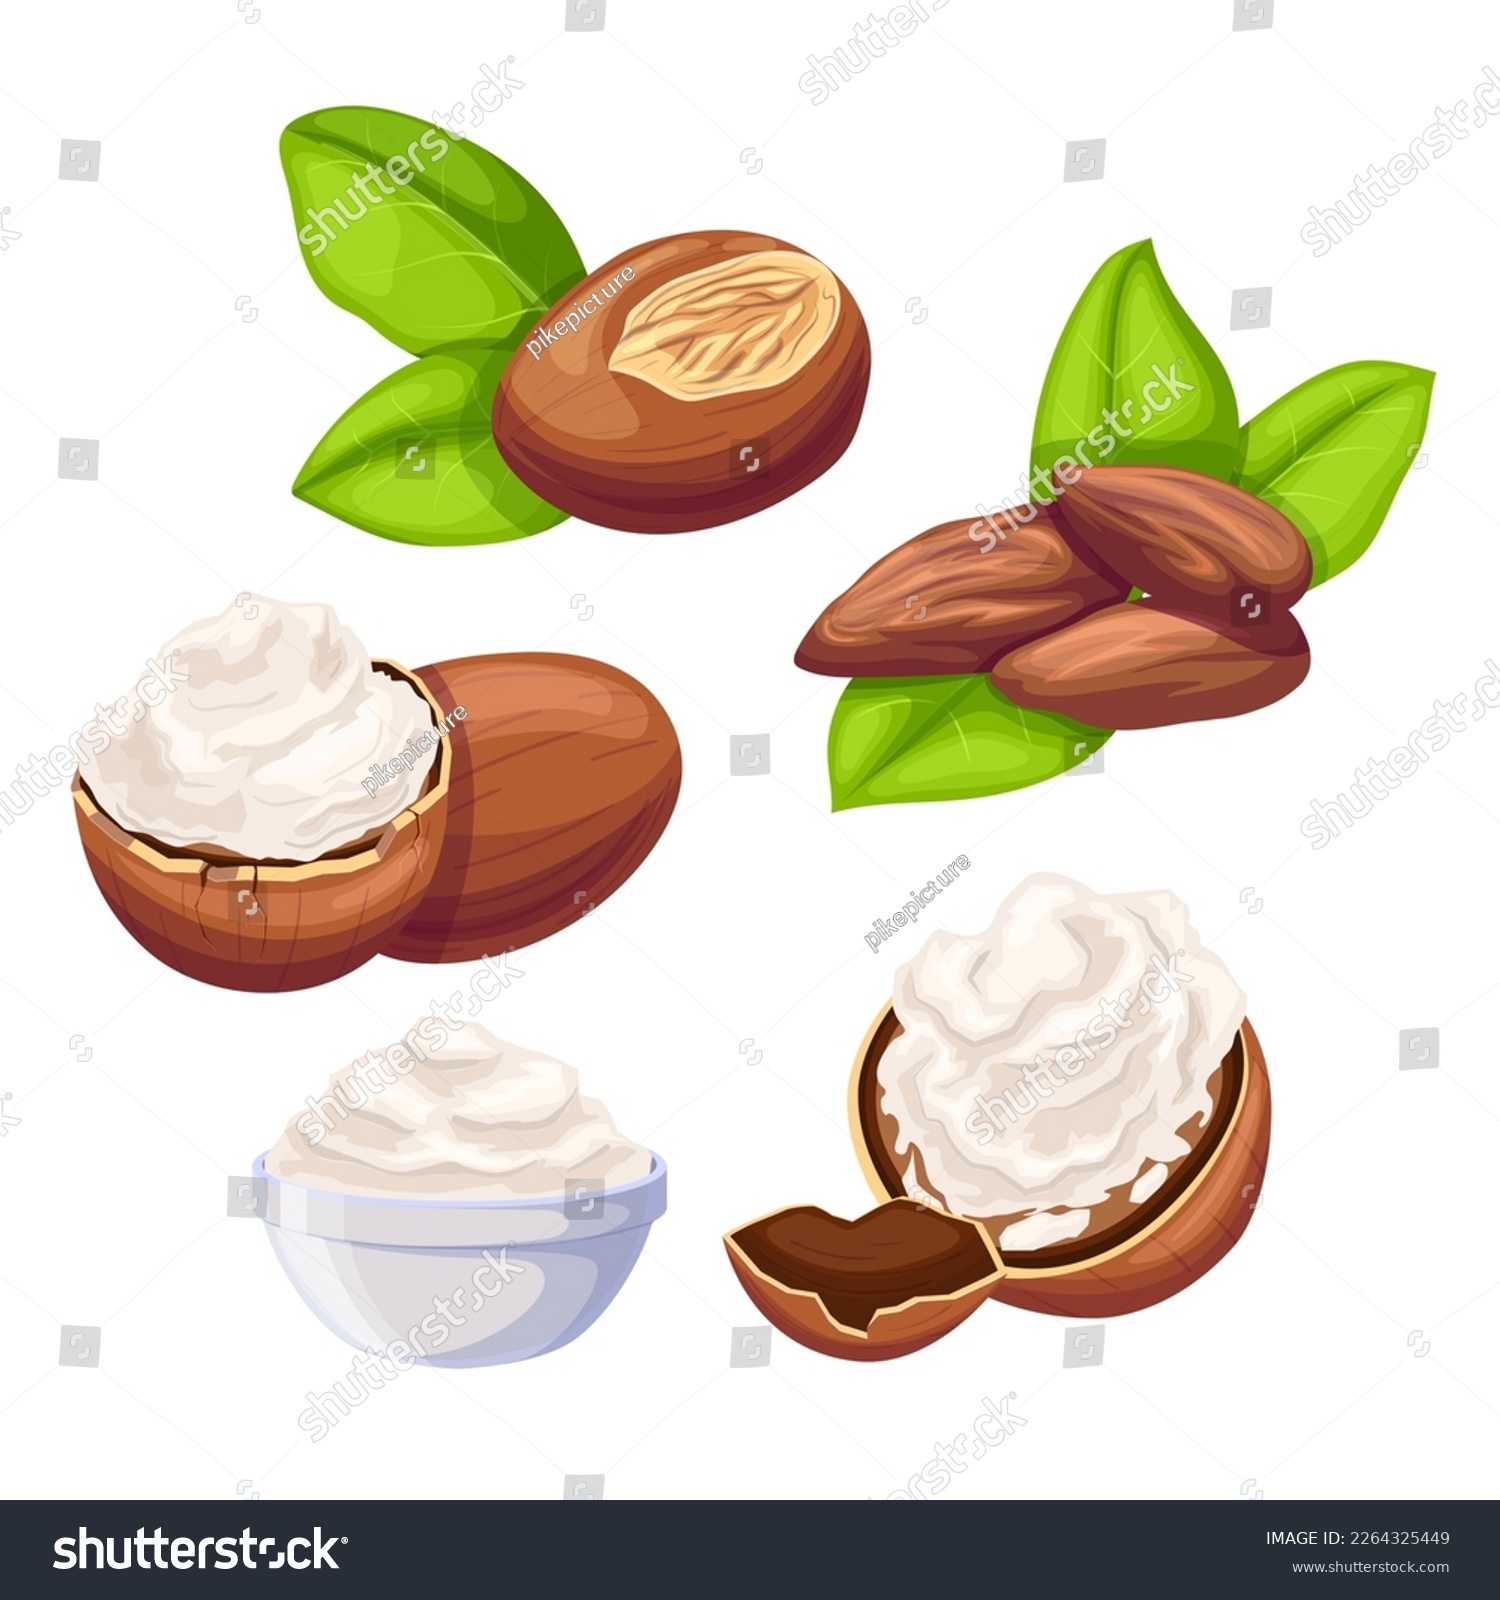 SVG of shea beauty butter set cartoon. natural cosmetic, organic ingredient, care product, white sheabutter, skin skincare, wellness nut, fresh treatment shea beauty butter vector illustration svg